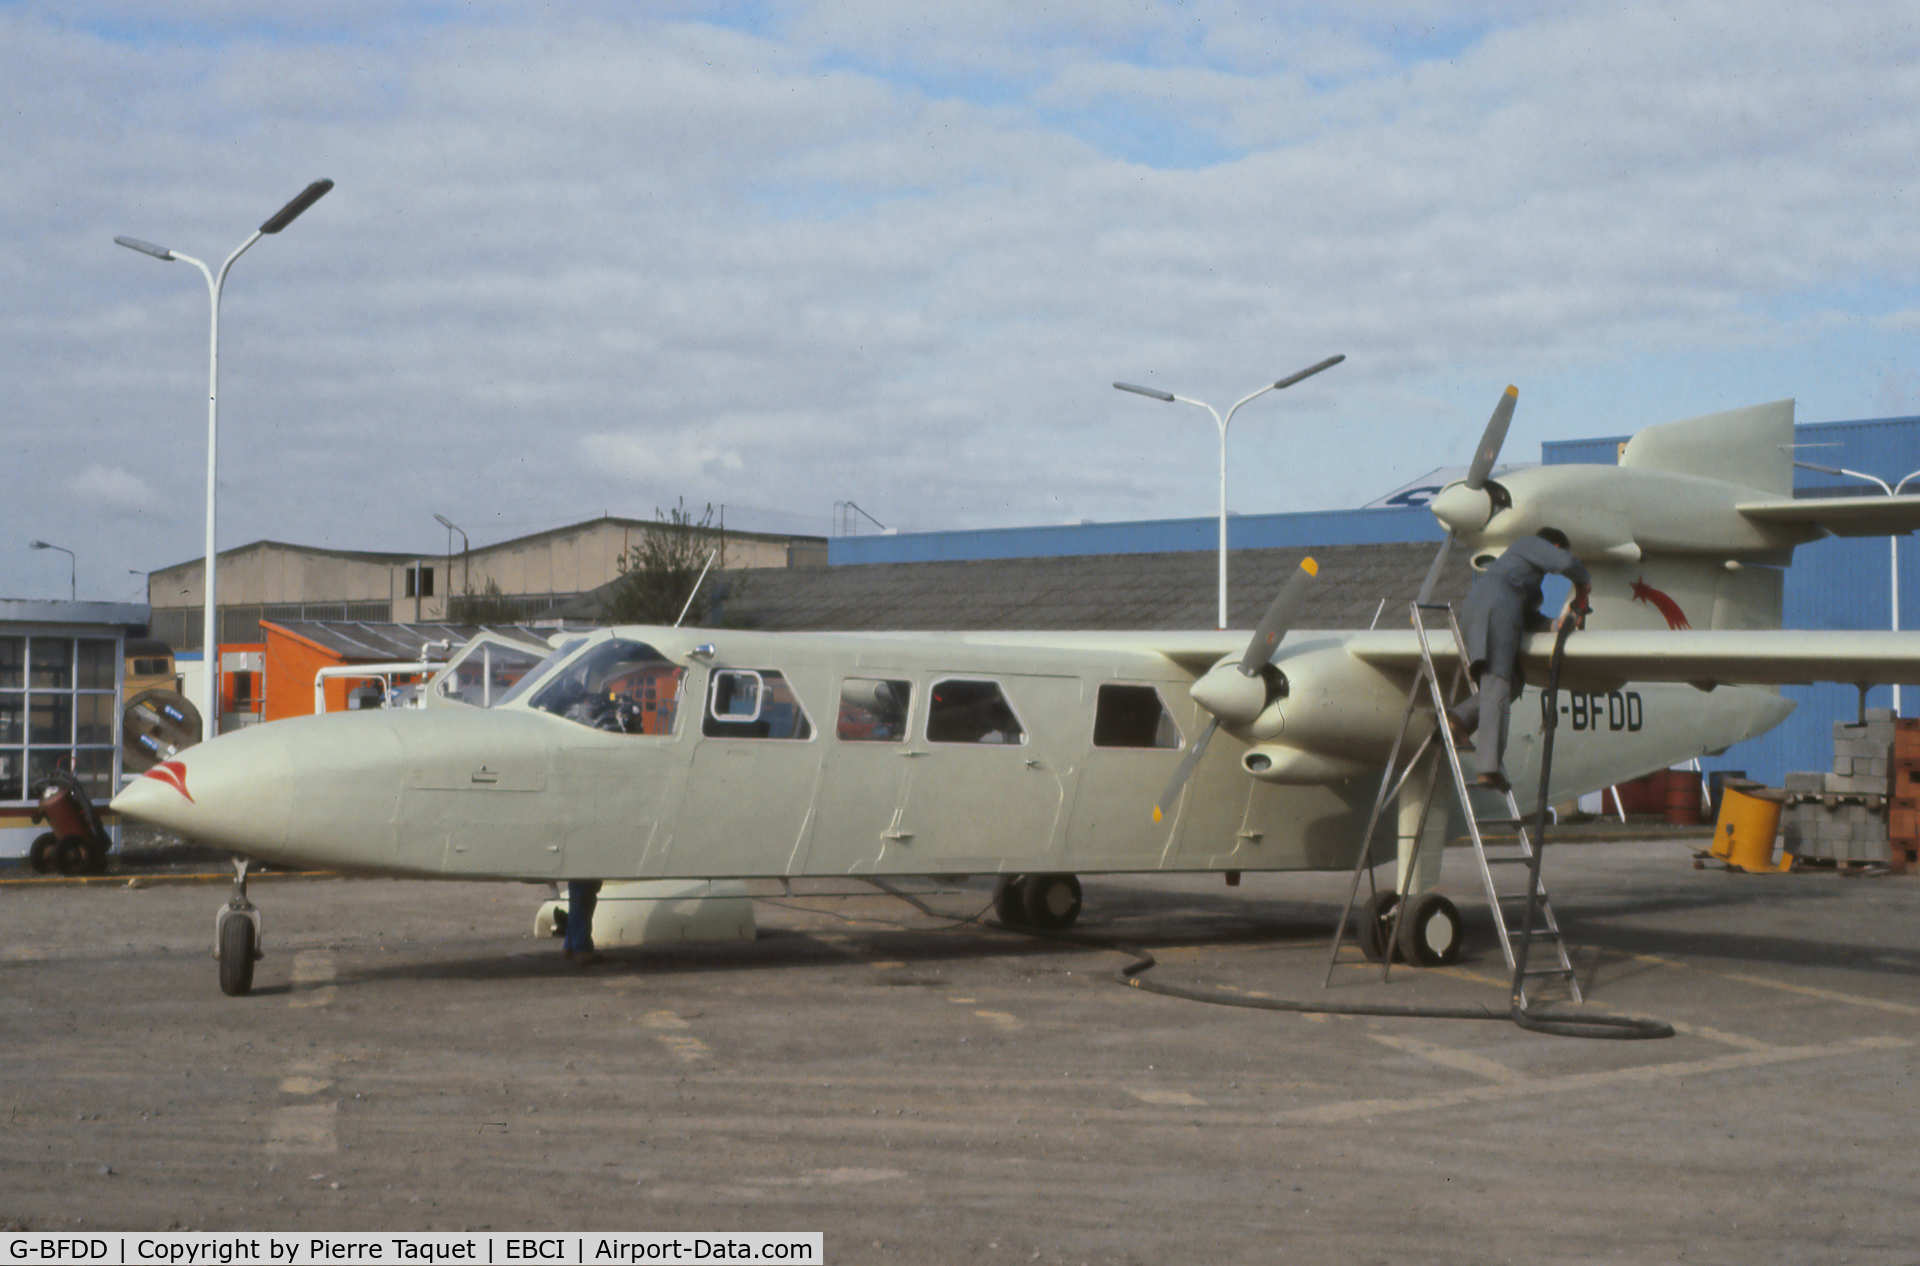 G-BFDD, 1980 Britten-Norman BN-2A Mk.III-2 Trislander C/N 1061, Picture taken in 1980 at SONACA Gosselies (Brussels South Airport) shortly before delivery to Bembridge for finalization, with special decoration as this was the 